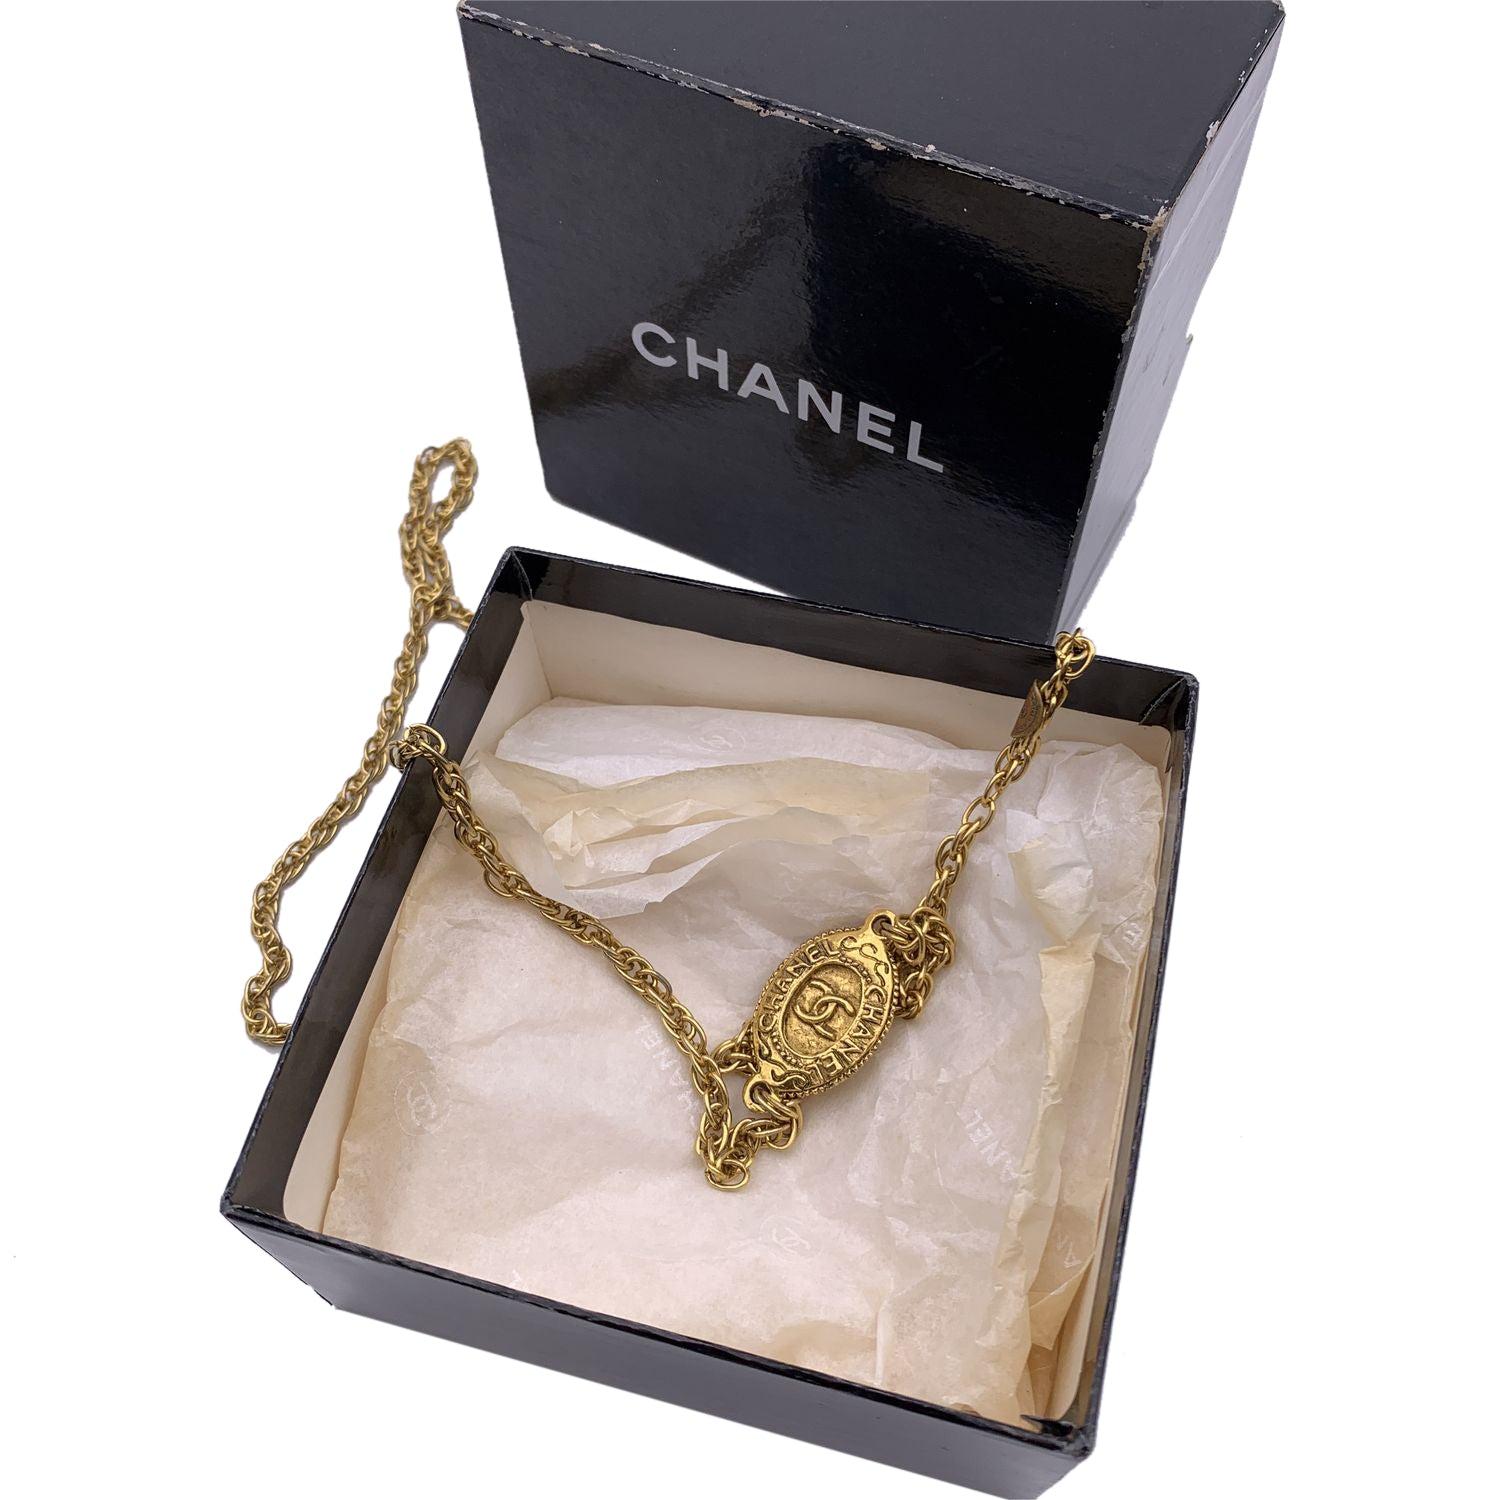 Vintage gold metal chain necklace from CHANEL. It feature a beautiful gold metal chain with oval medallion with CC logo. No closure. Necklace drop: 18.5 inches - 47 cm. 'CHANEL - CC - Made in France' round tab Condition A - EXCELLENT Gently used.